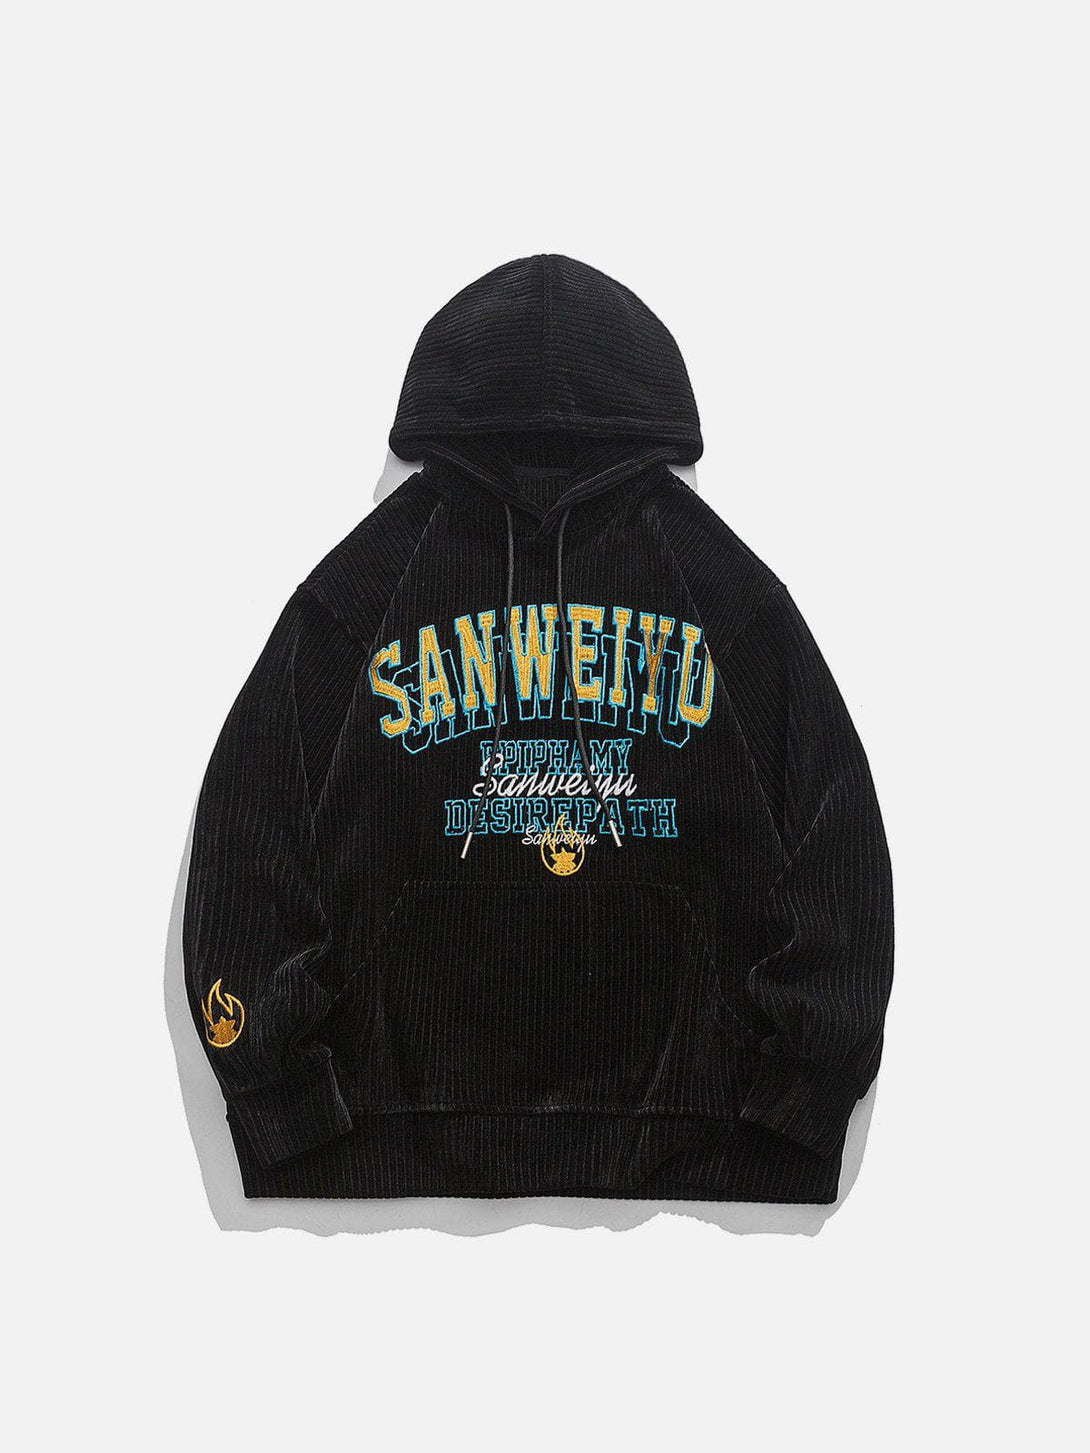 Levefly - Embroidered Letters Corduroy Hoodie - Streetwear Fashion - levefly.com